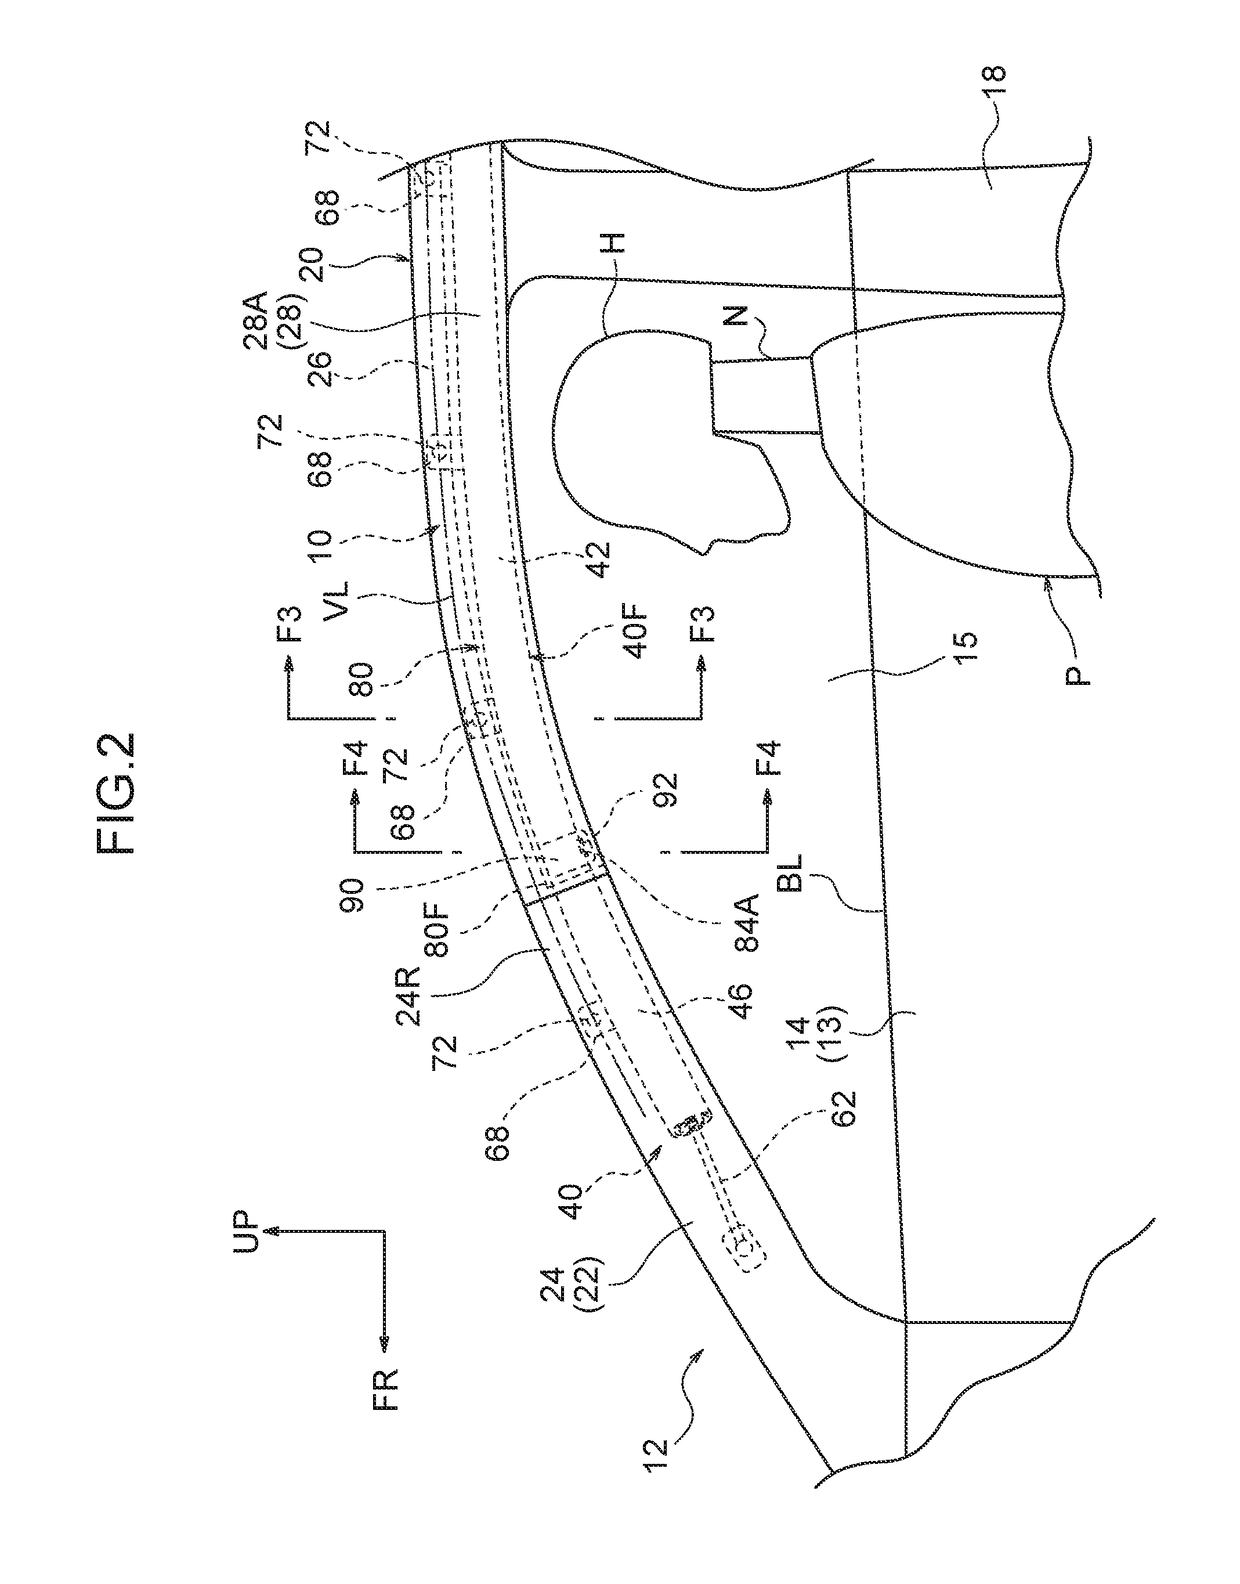 Curtain airbag device for vehicle